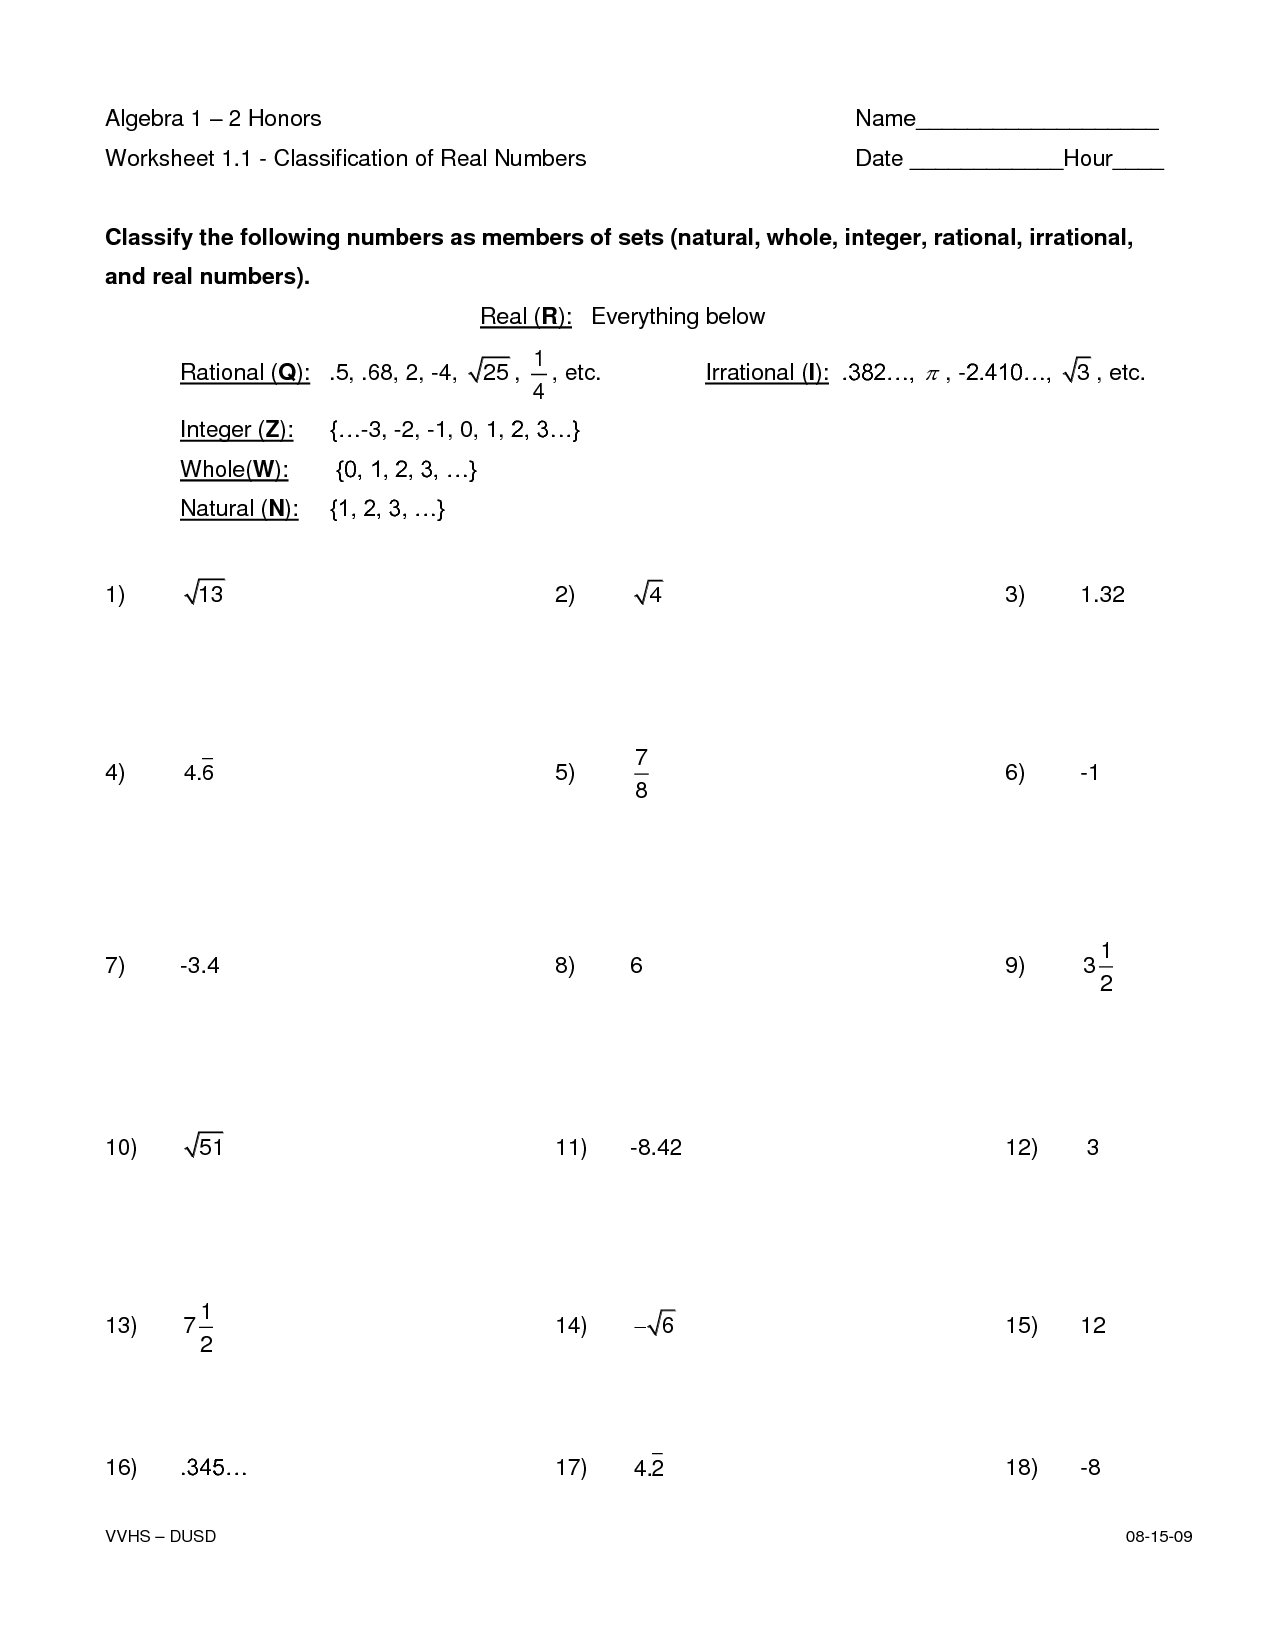 8-best-images-of-rational-numbers-worksheets-grade-6-rational-numbers-worksheets-classifying